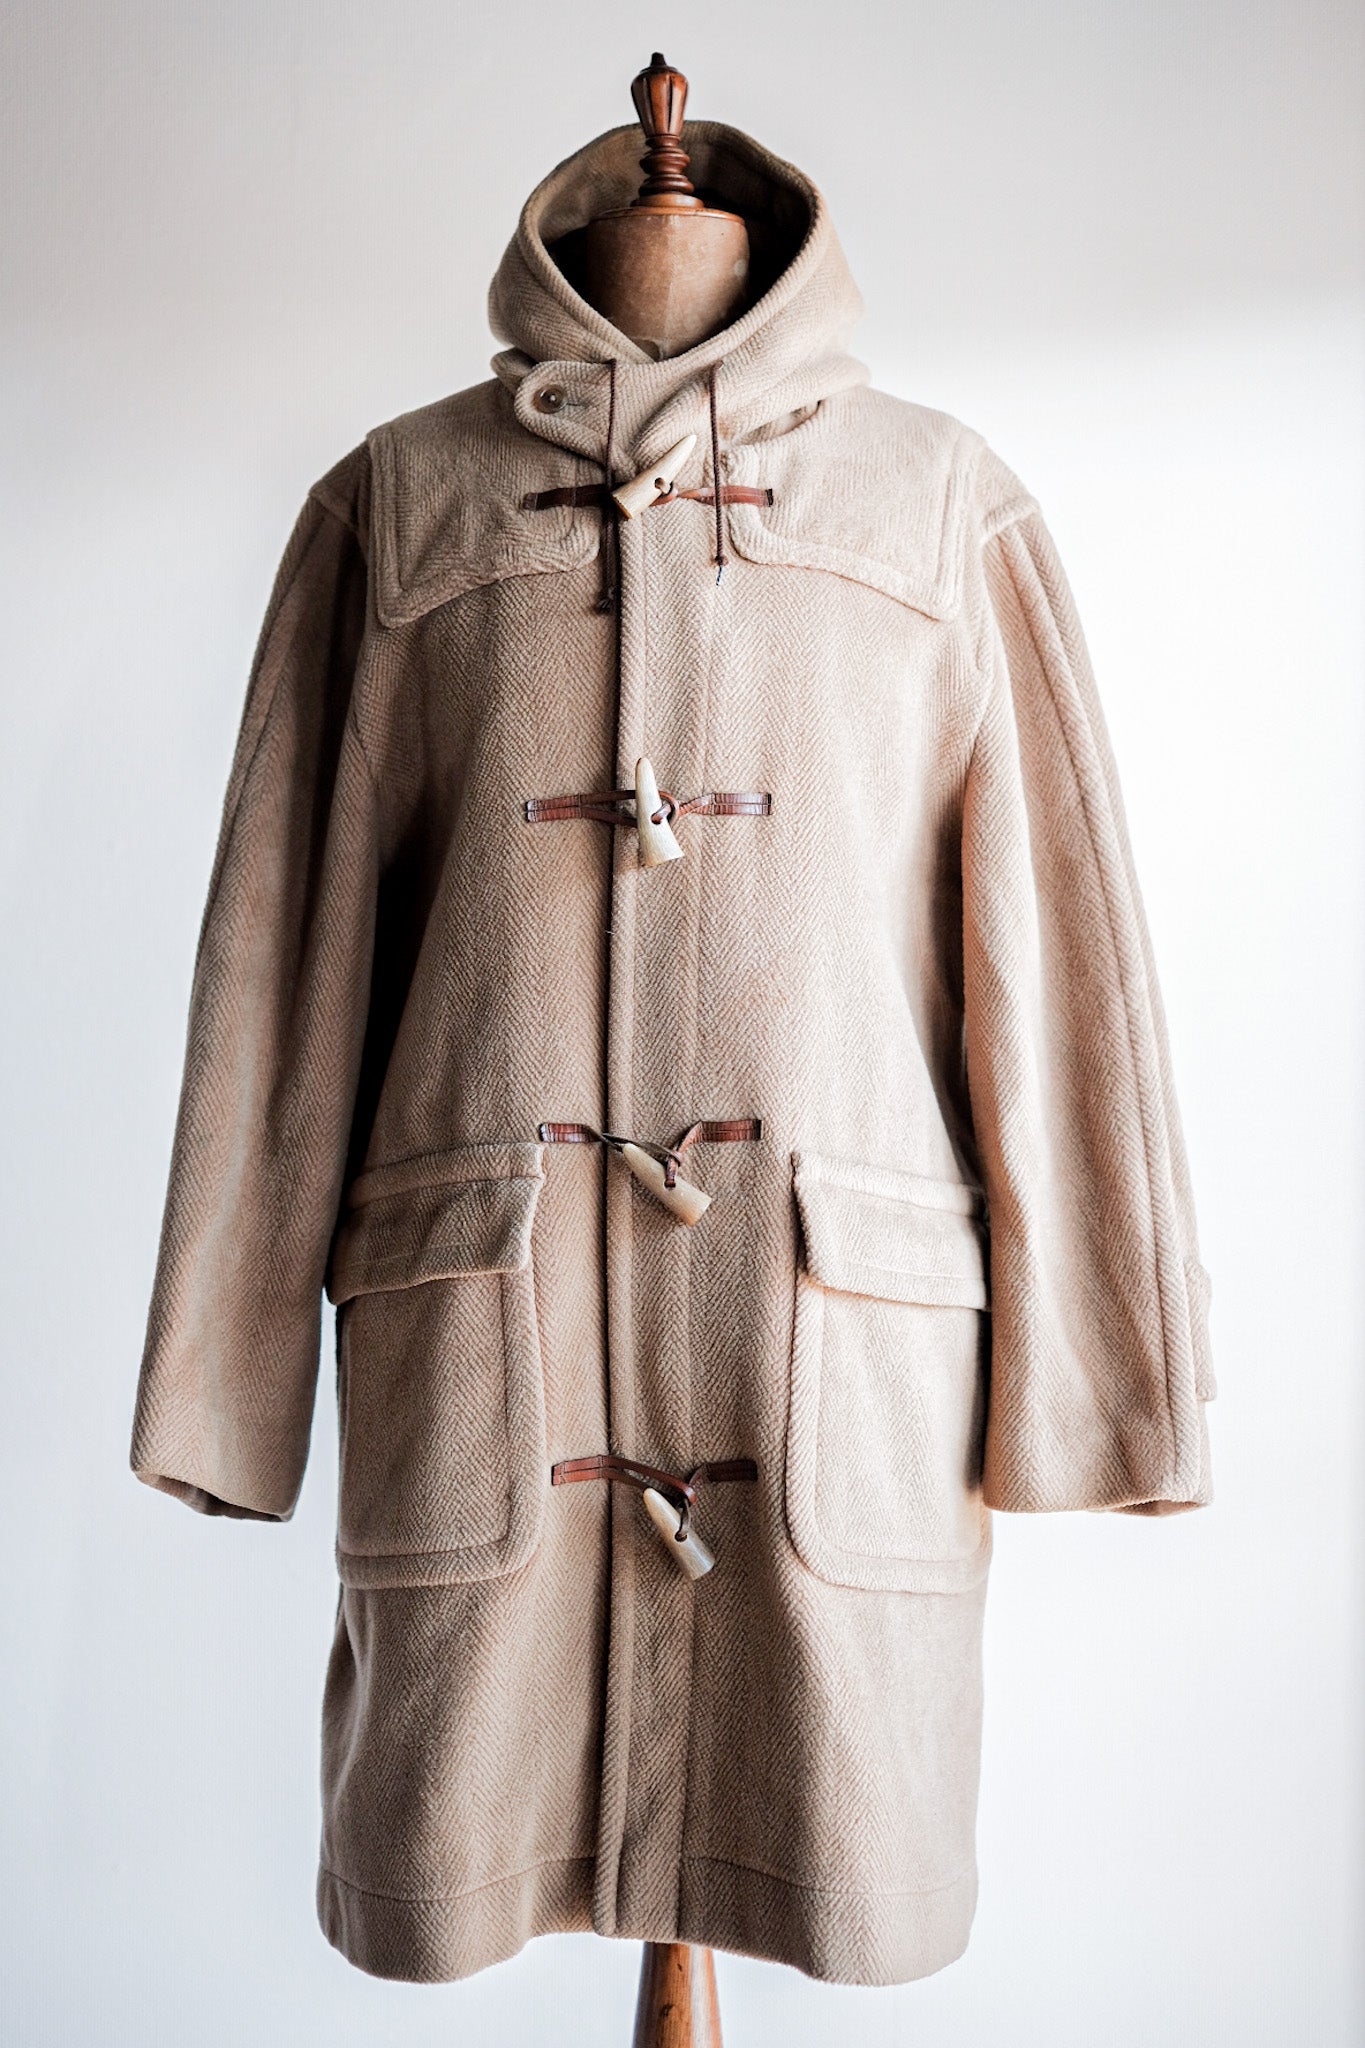 【~80's】Old England Wool Duffle Coat Made by INVERTERE "Moorbrook"